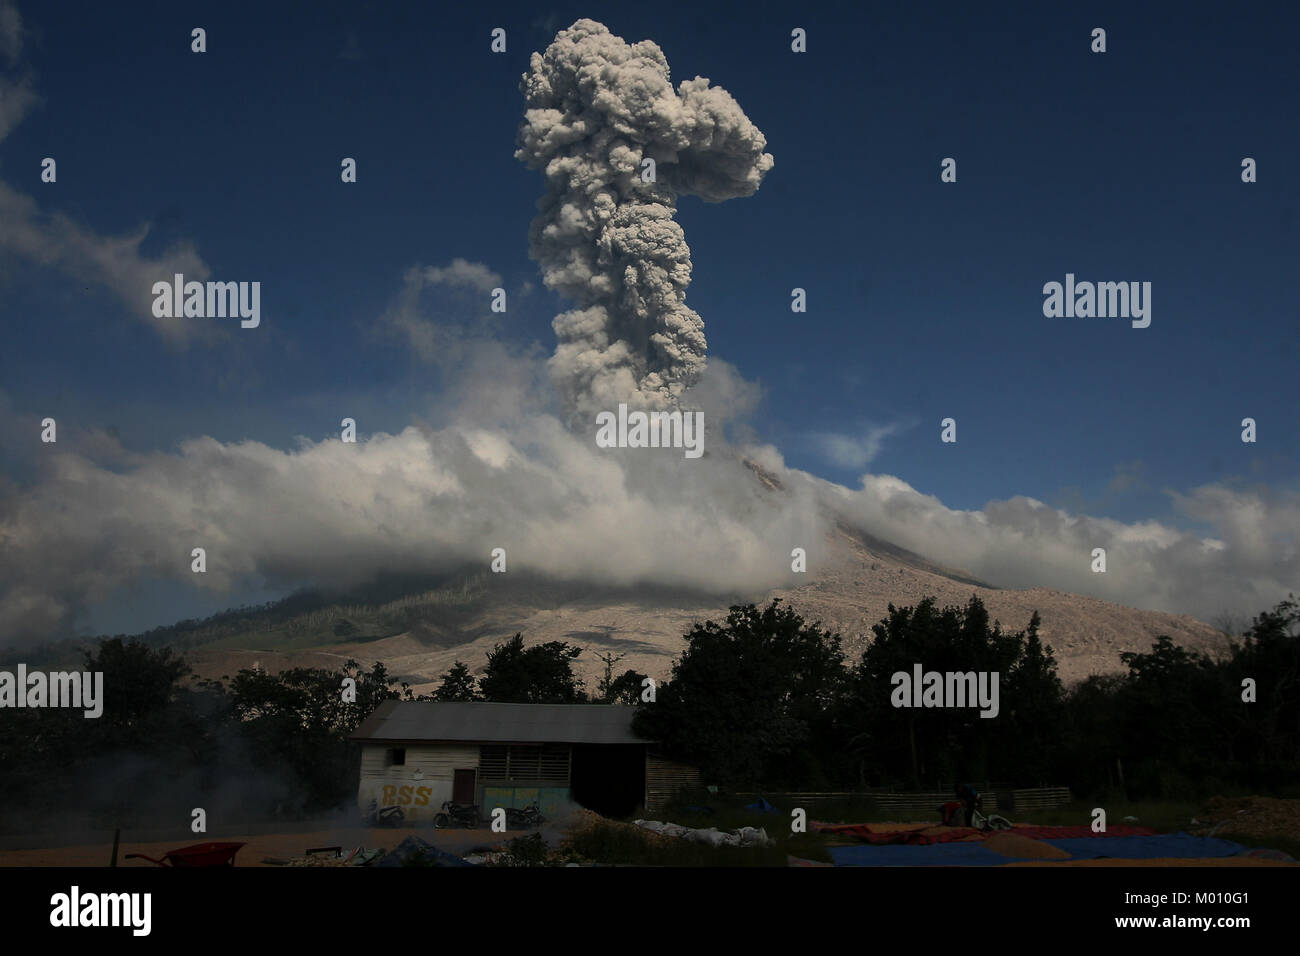 North Sumatera, Indonesia. 18th Jan, 2018. Mount Sinabung spews in Karo, North Sumatera, Indonesia, Jan. 18, 2018. The eruption of Mount Sinabung has become a regular occurrence since 2010 after it remained dormant for four centuries. Credit: YT Haryono/Xinhua/Alamy Live News Stock Photo